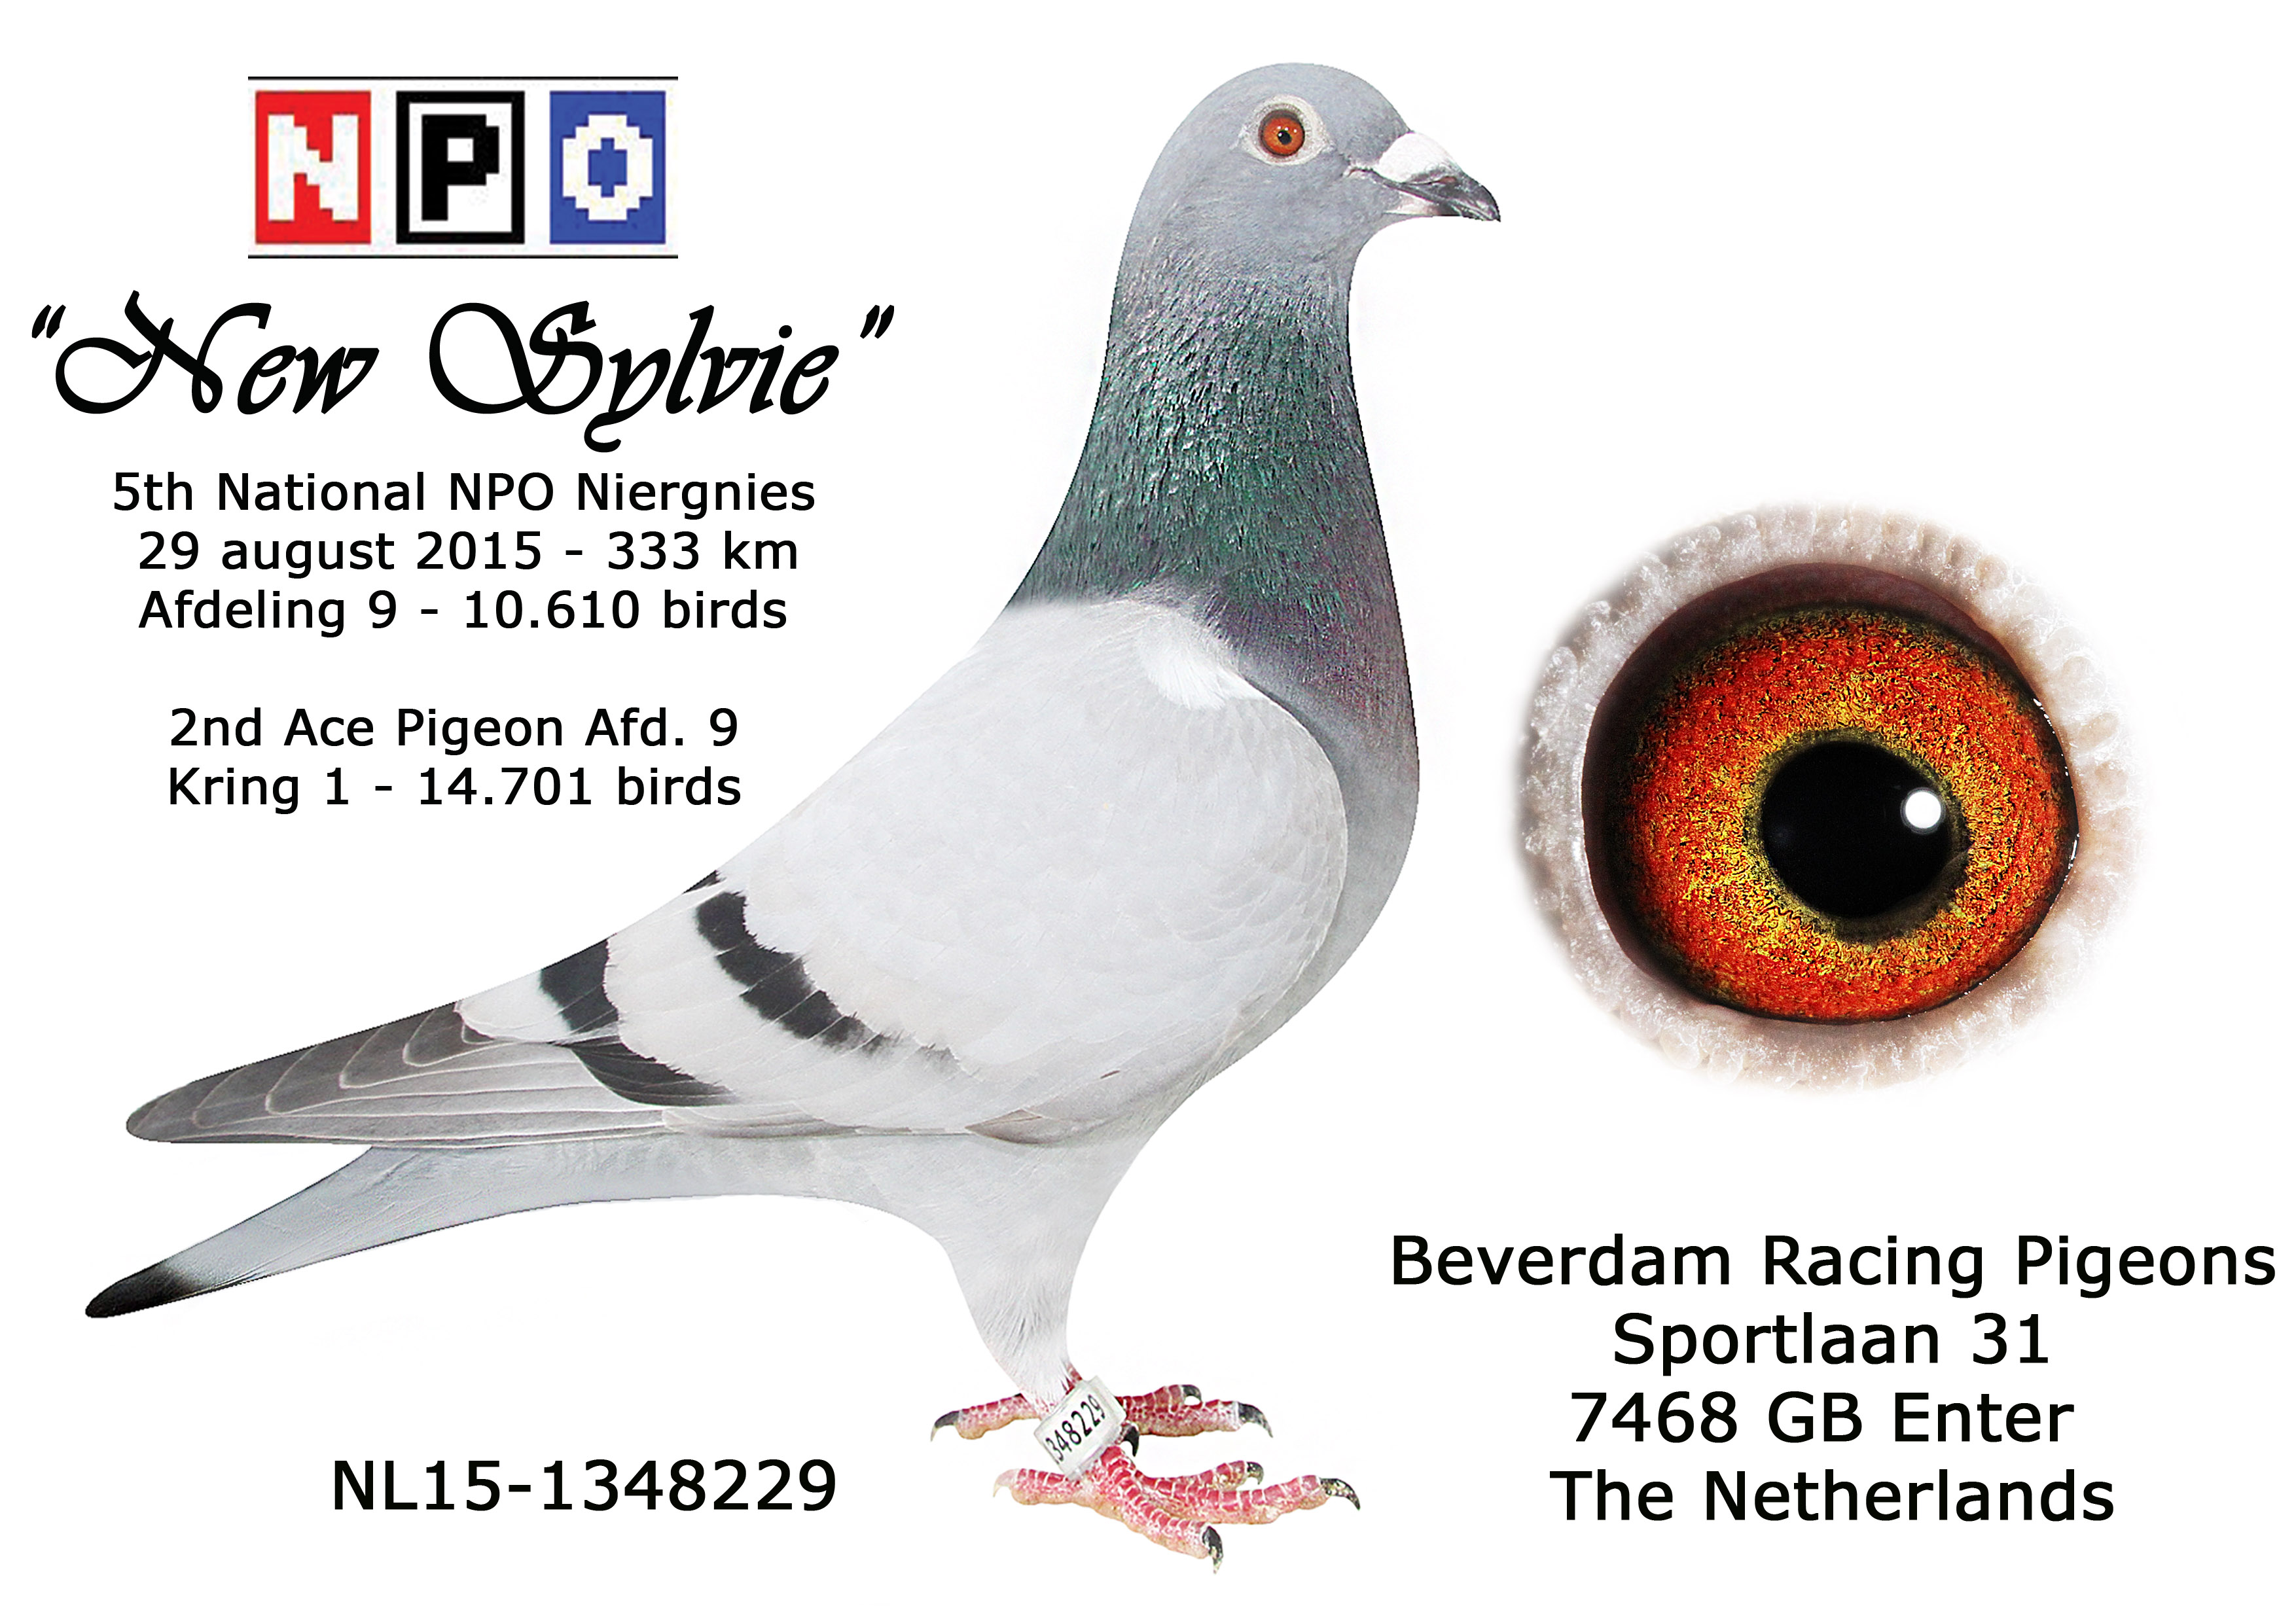 Valkuilen systeem Telemacos 2015 CHAMPIONSHIPS IN CC3 AFDELING 9 160 MEMEBERS 5 KM RADIOUS. | Herman  Beverdam Racing Pigeons